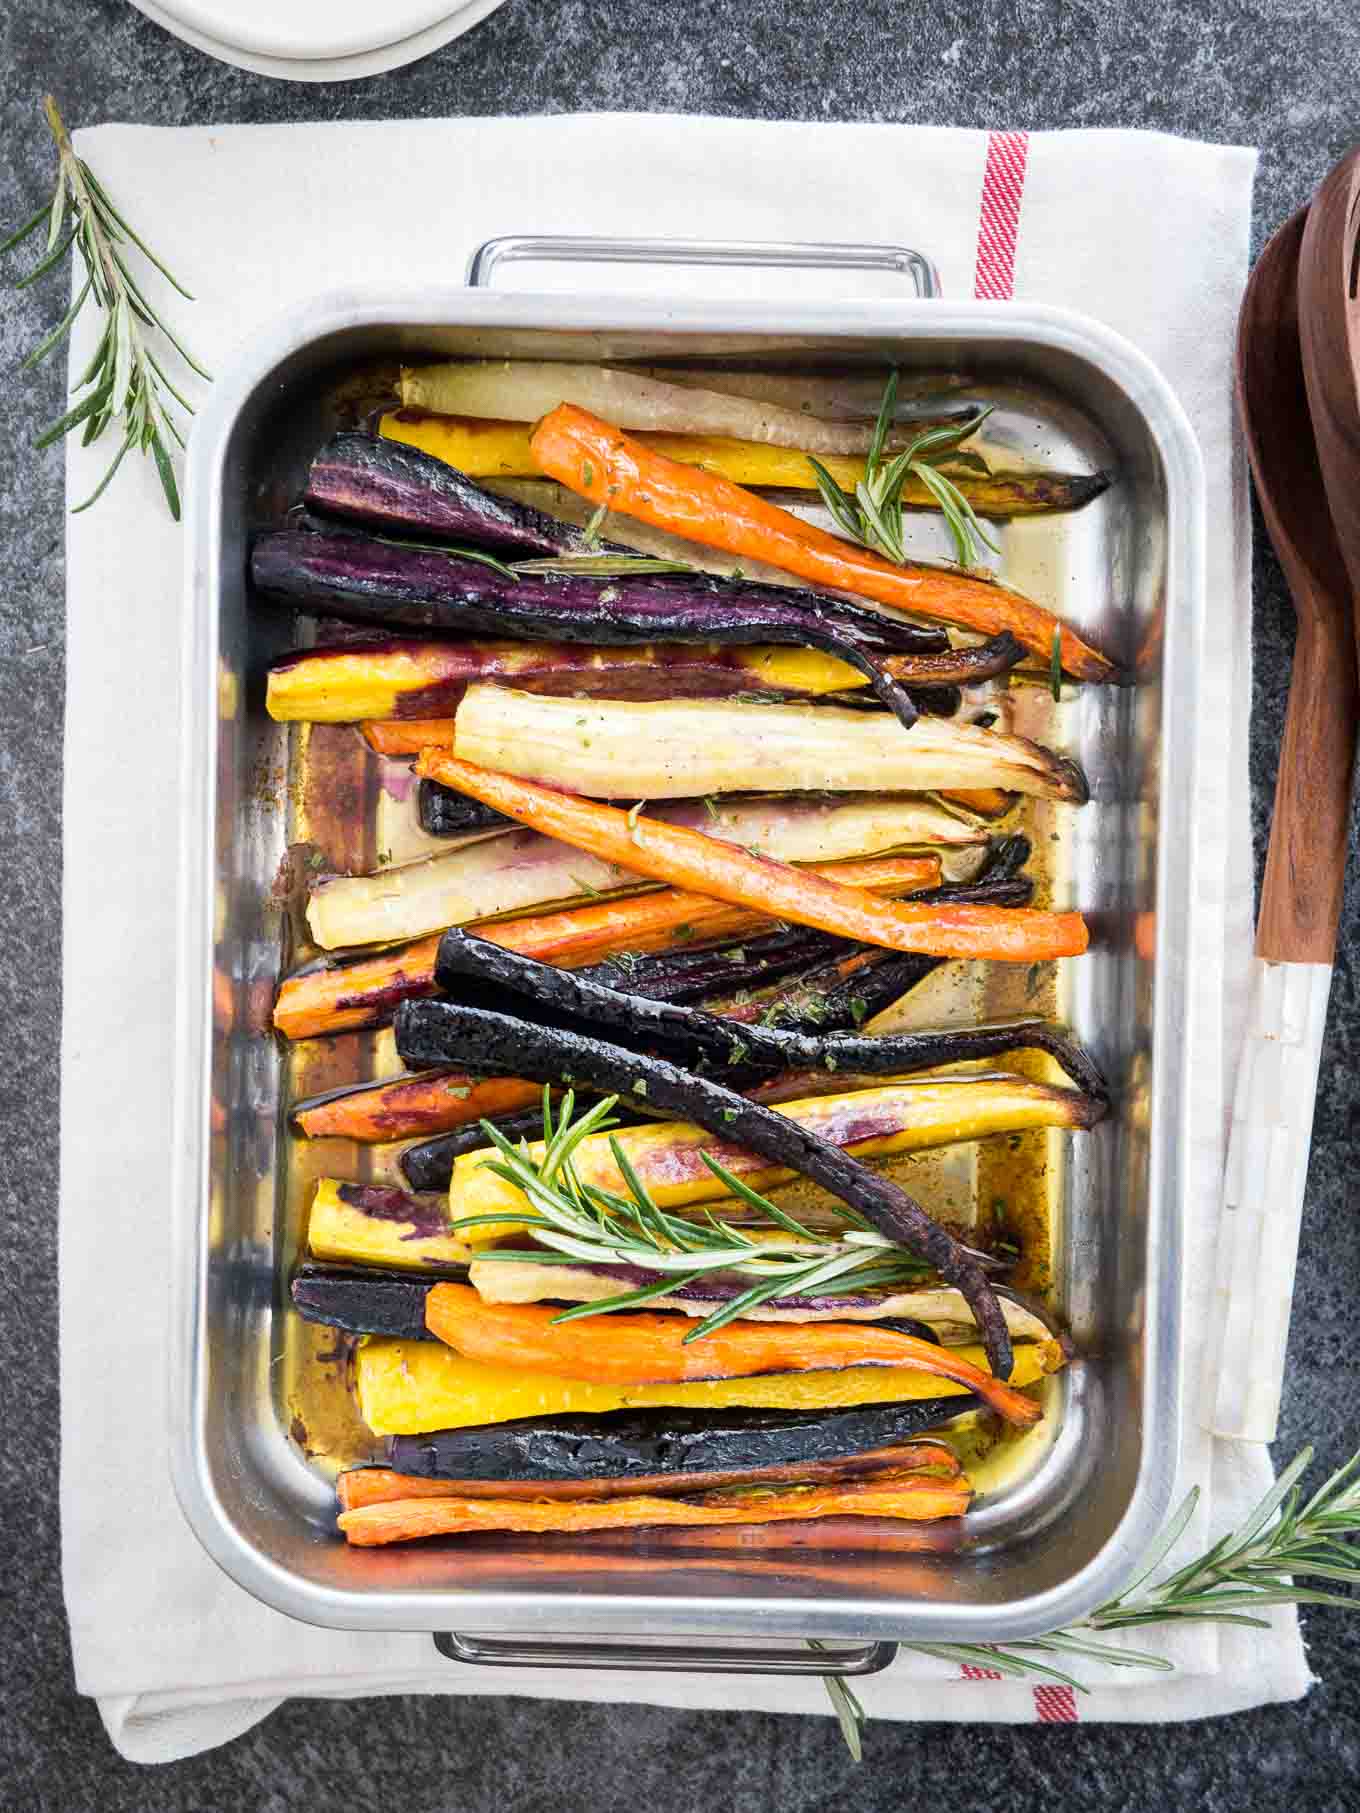 Top-down shot of a roasting pan with roasted rainbow carrots garnished with sprigs of rosemary on a white dishtowel with a red stripe. There are salad tongs next to it.